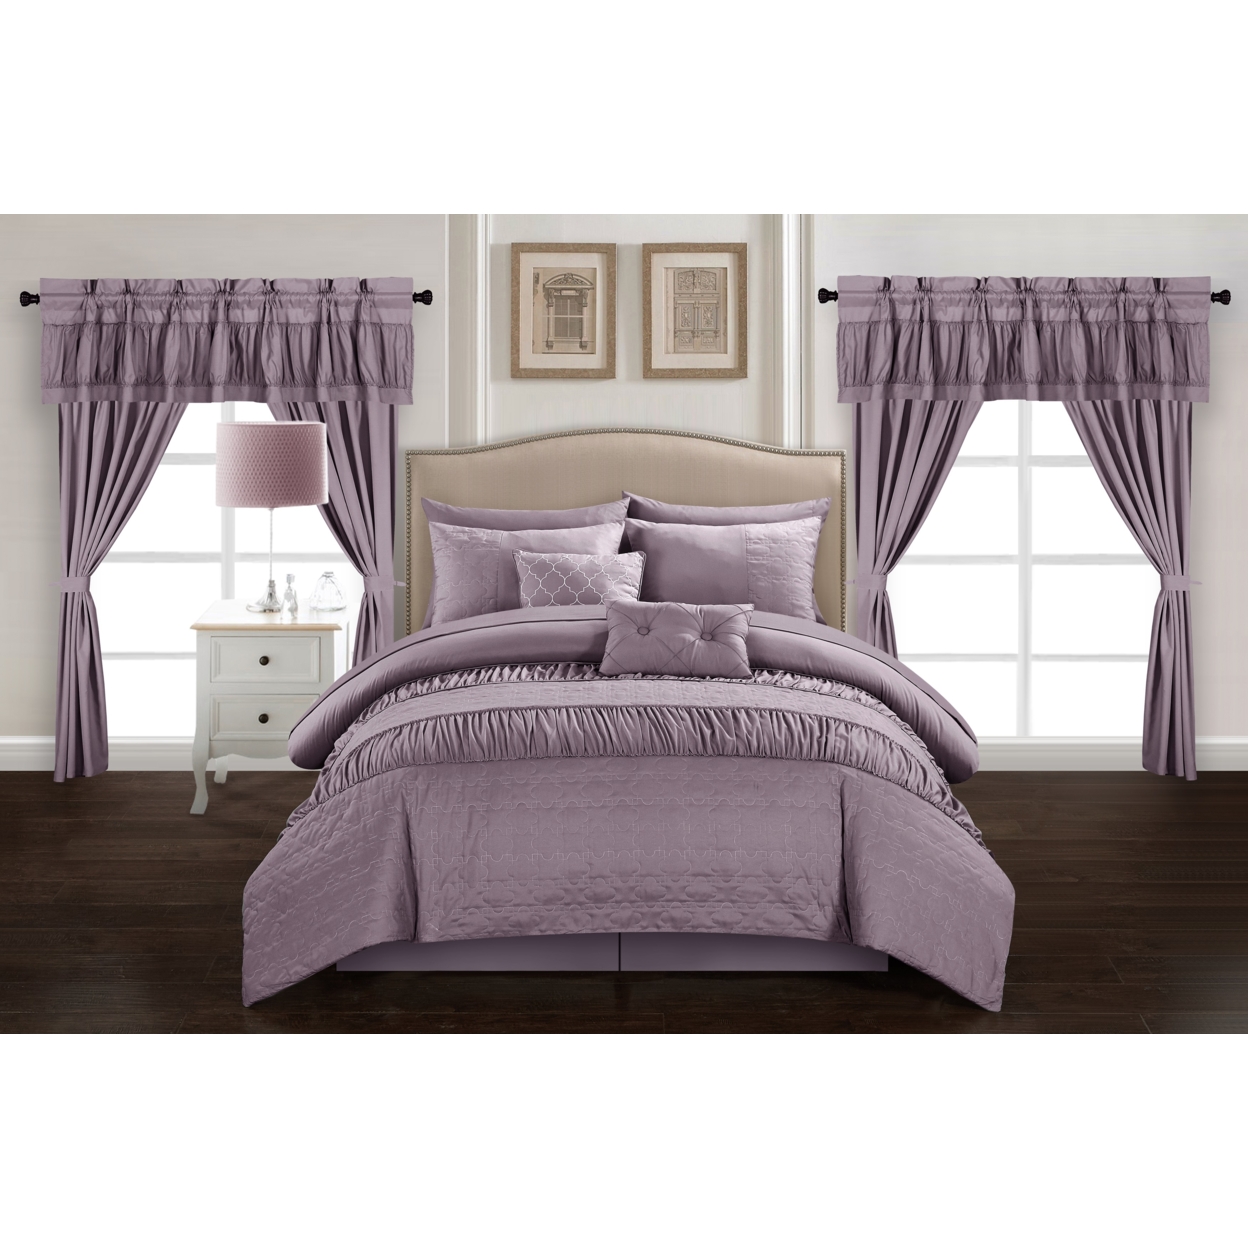 Mykonos 20 Piece Comforter Set Embossed Bedding - Sheets Window Treatments Decorative Pillows Shams Bed Skirt Included - Plum, Queen